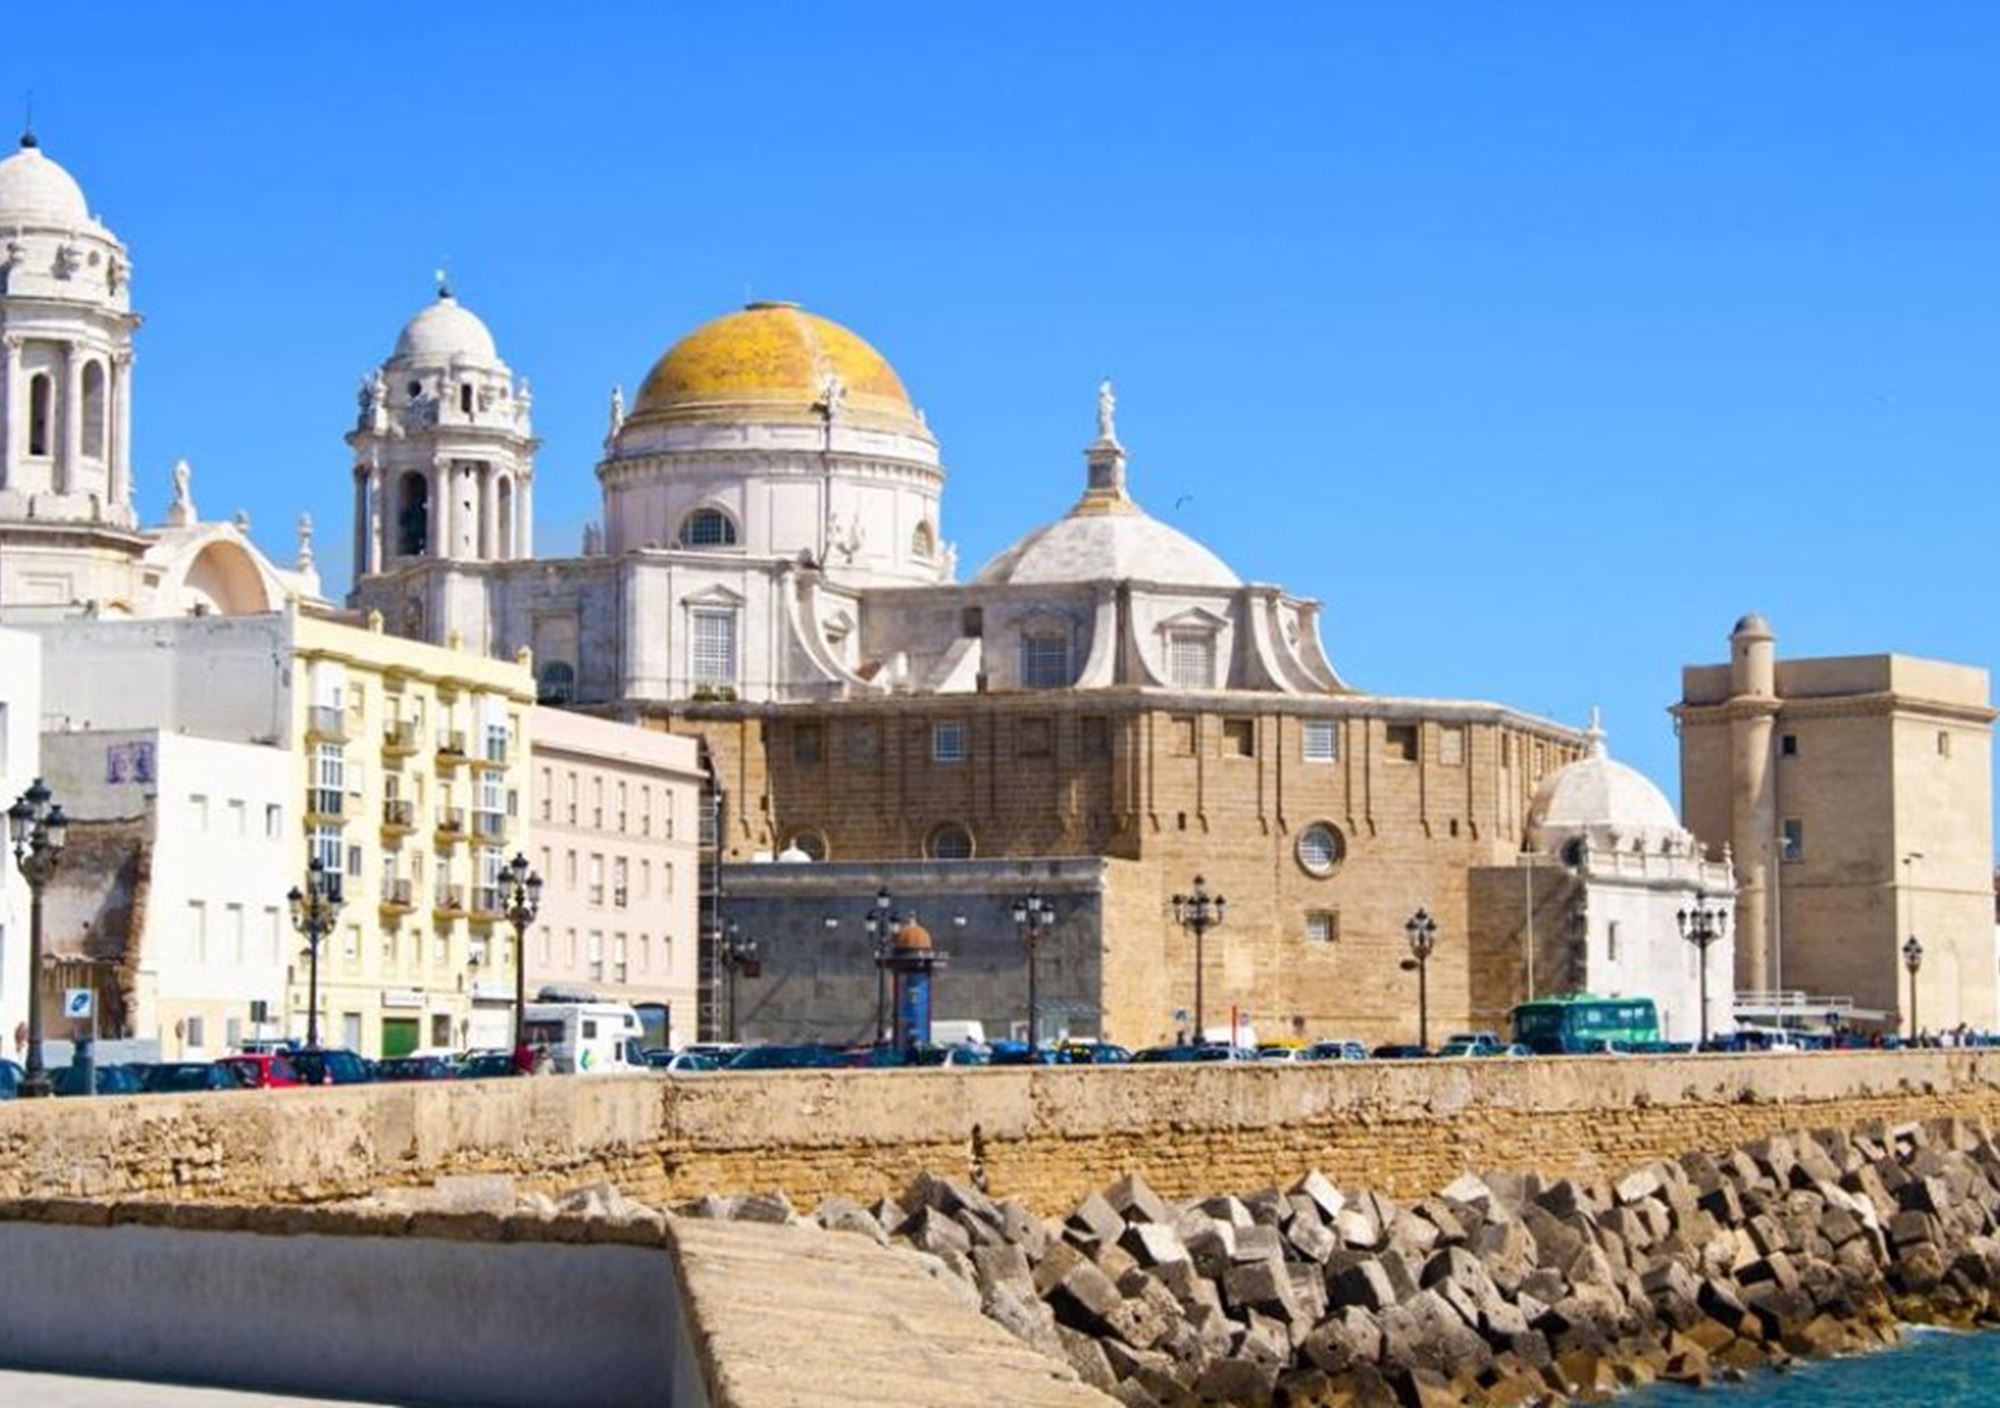 trips guided excursions tours visits attractions activities in Cadiz